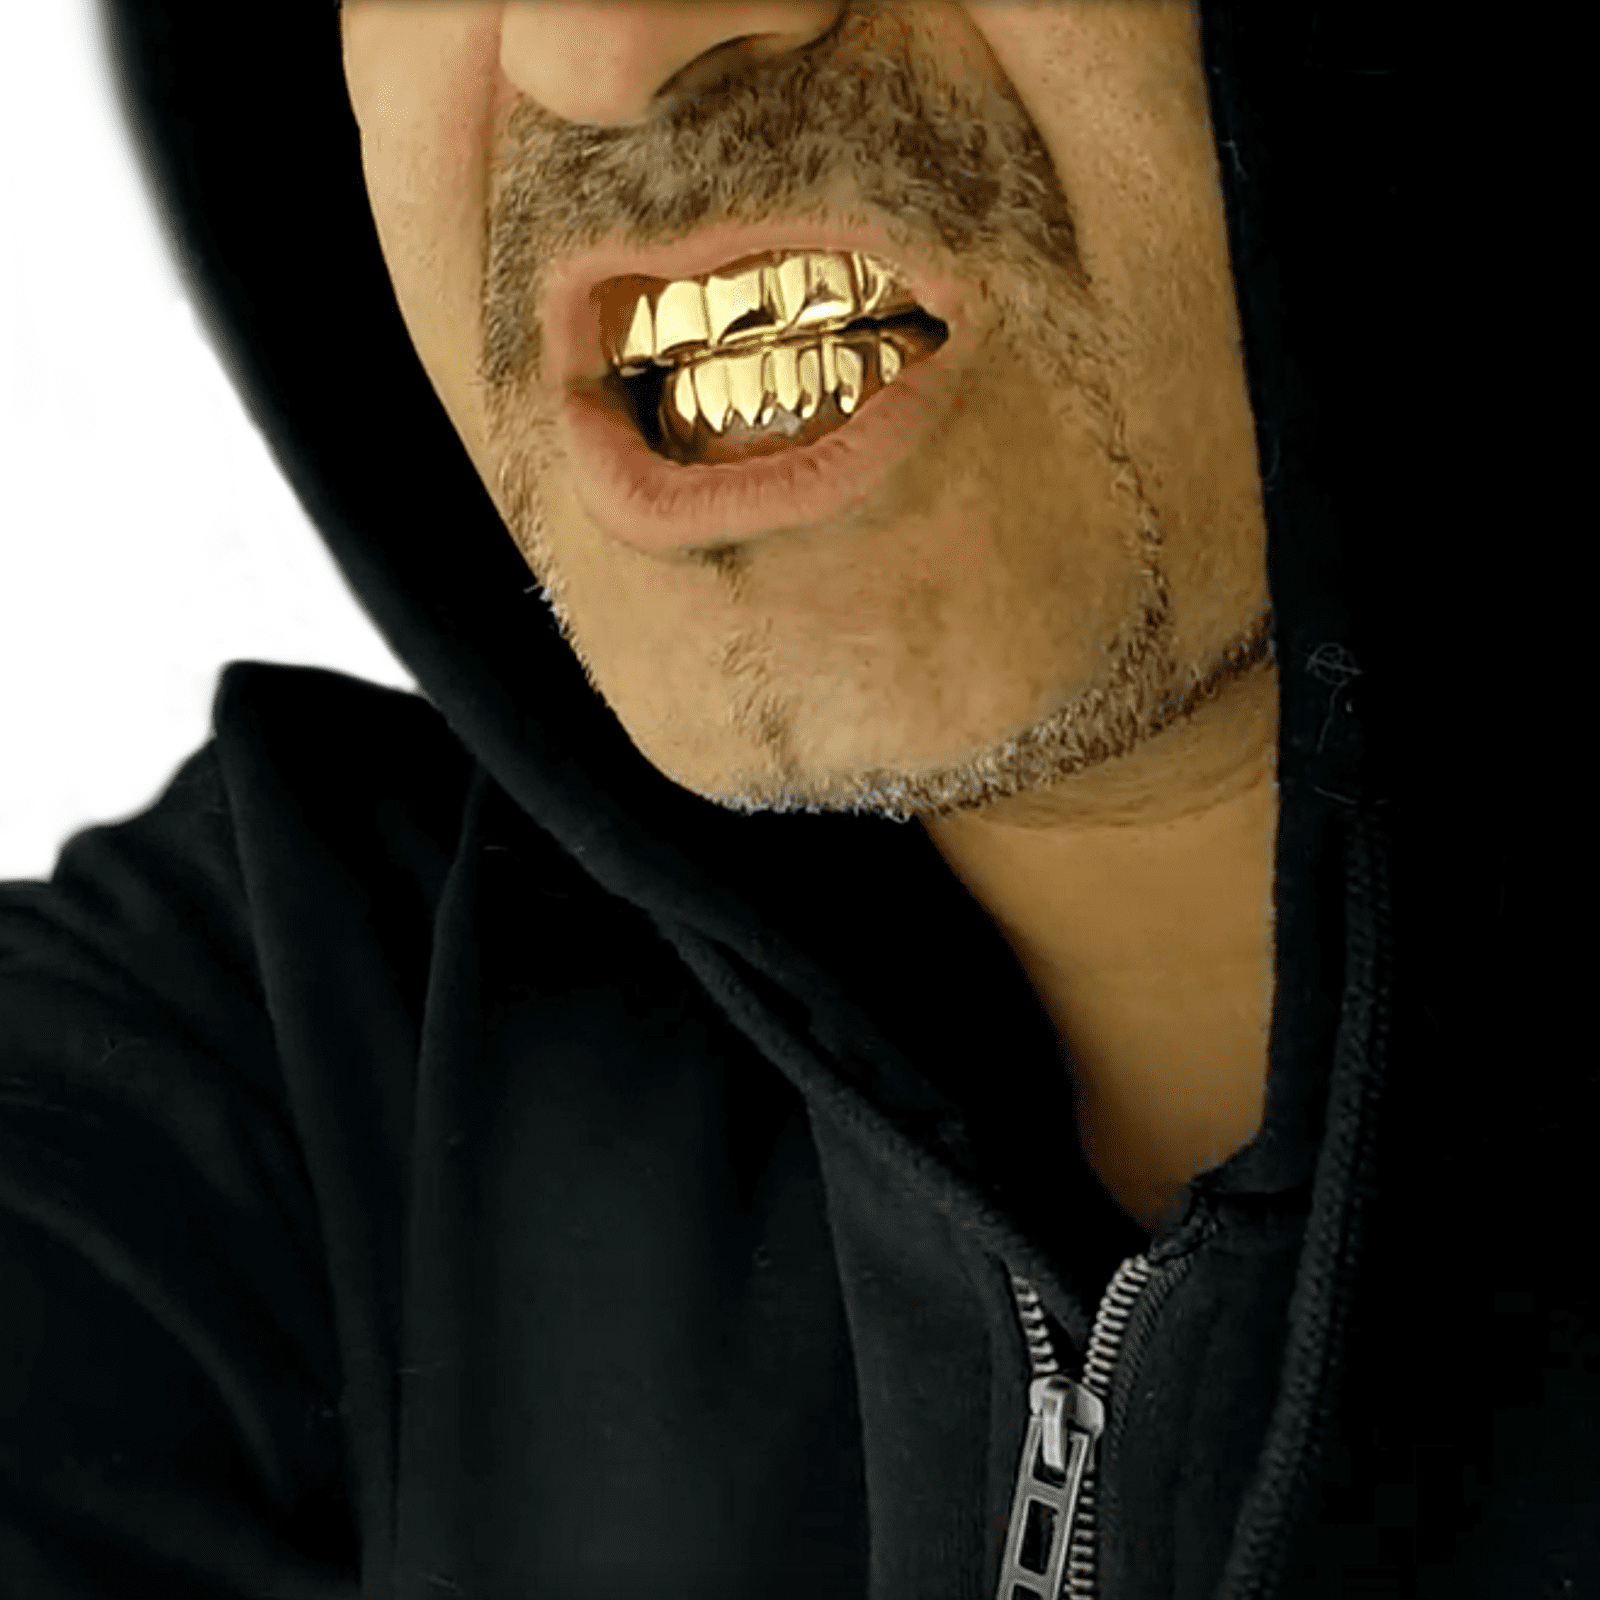 14K Gold Plated Hip Hop Grill 6 Top Teeth & 6 Bottom Teeth Grills Set Iced Out Rapper Mouth Grill